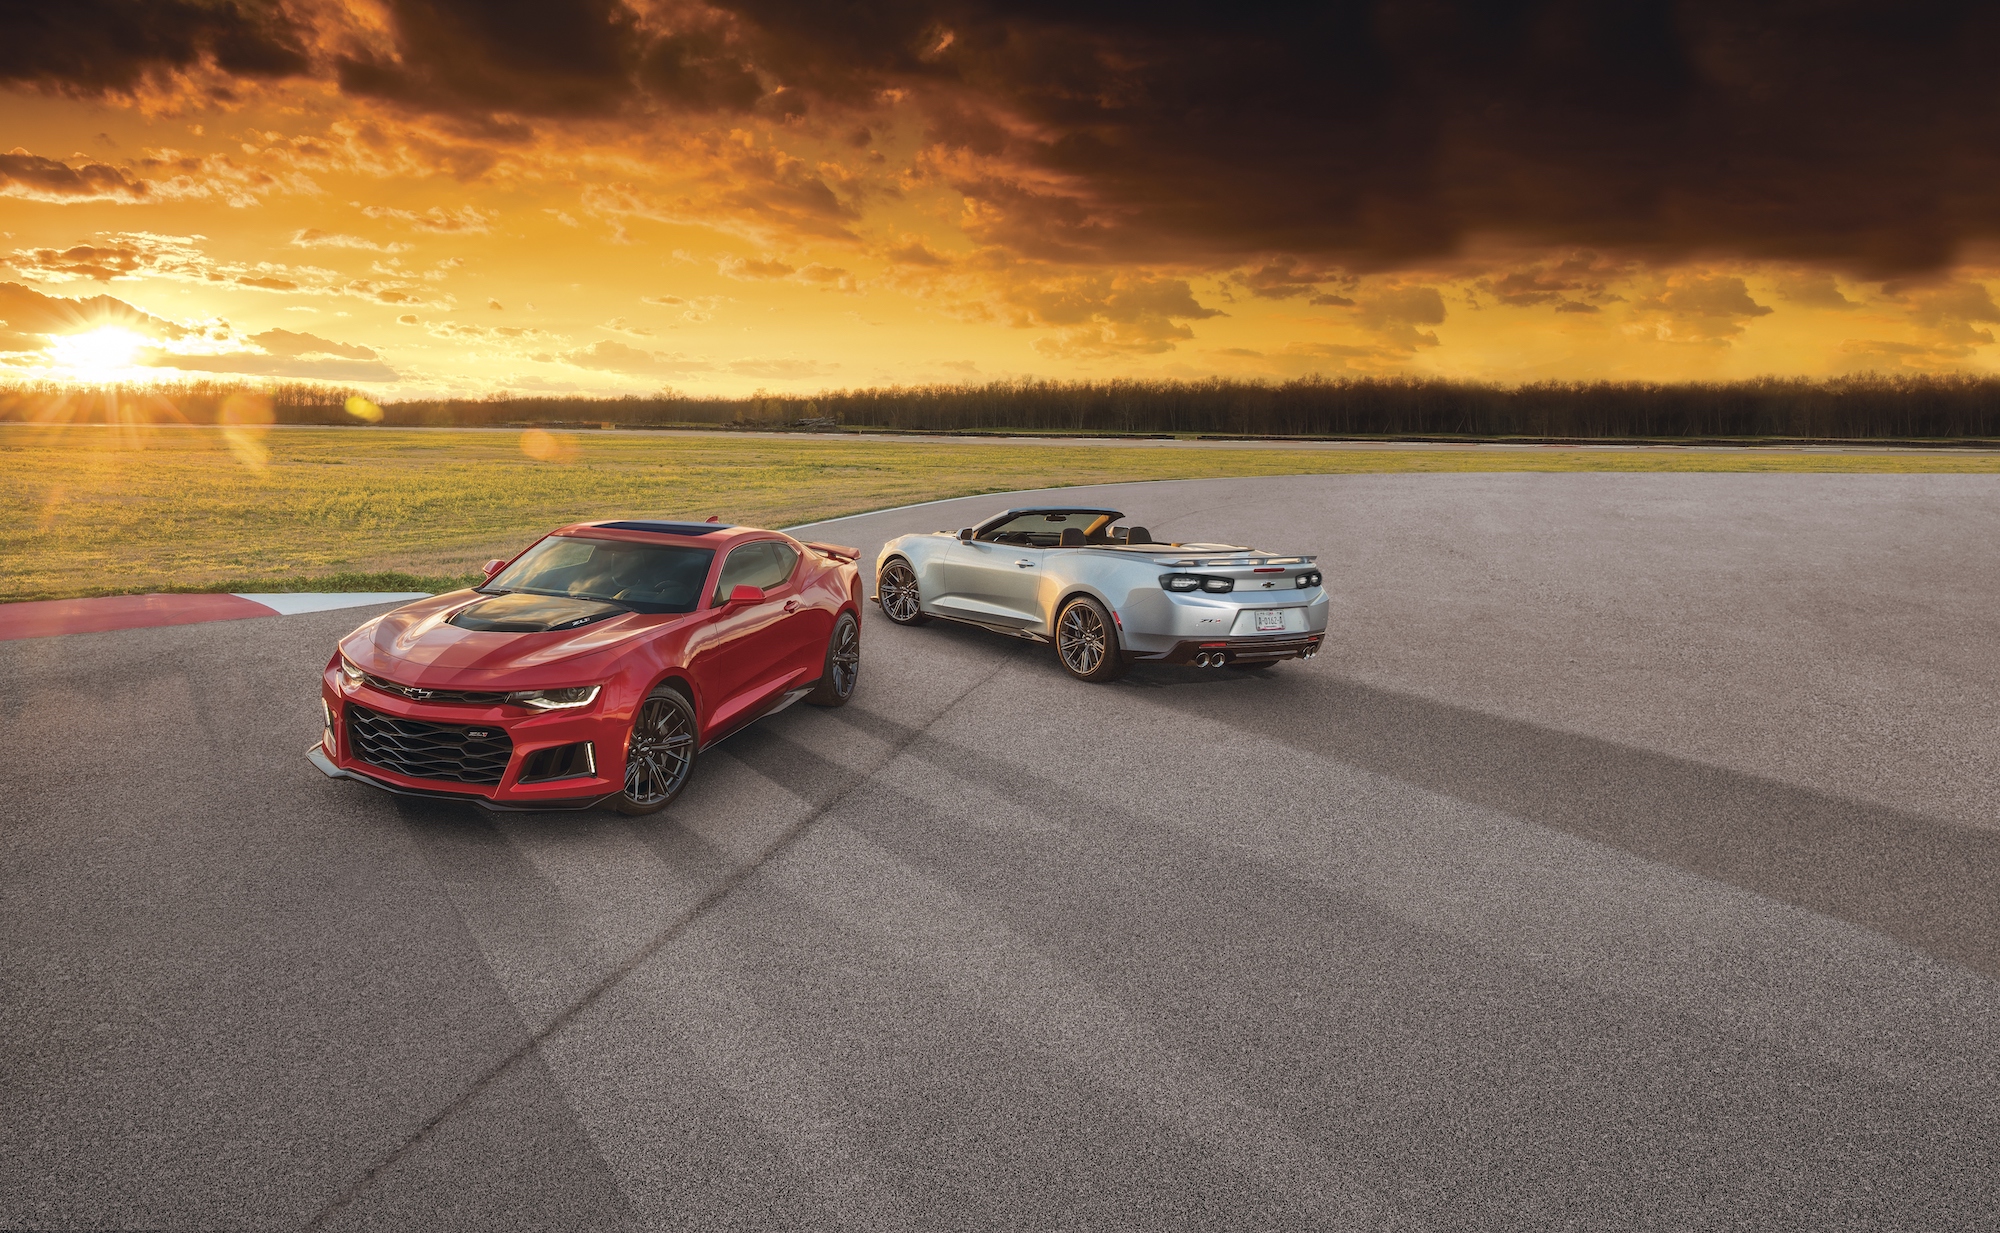 A red 2021 Chevy Camaro ZL1 coupe and a silver 2021 Chevy Camaro ZL1 convertible parked on a large expanse of asphalt overlooking grass, trees, and the sun on the horizon